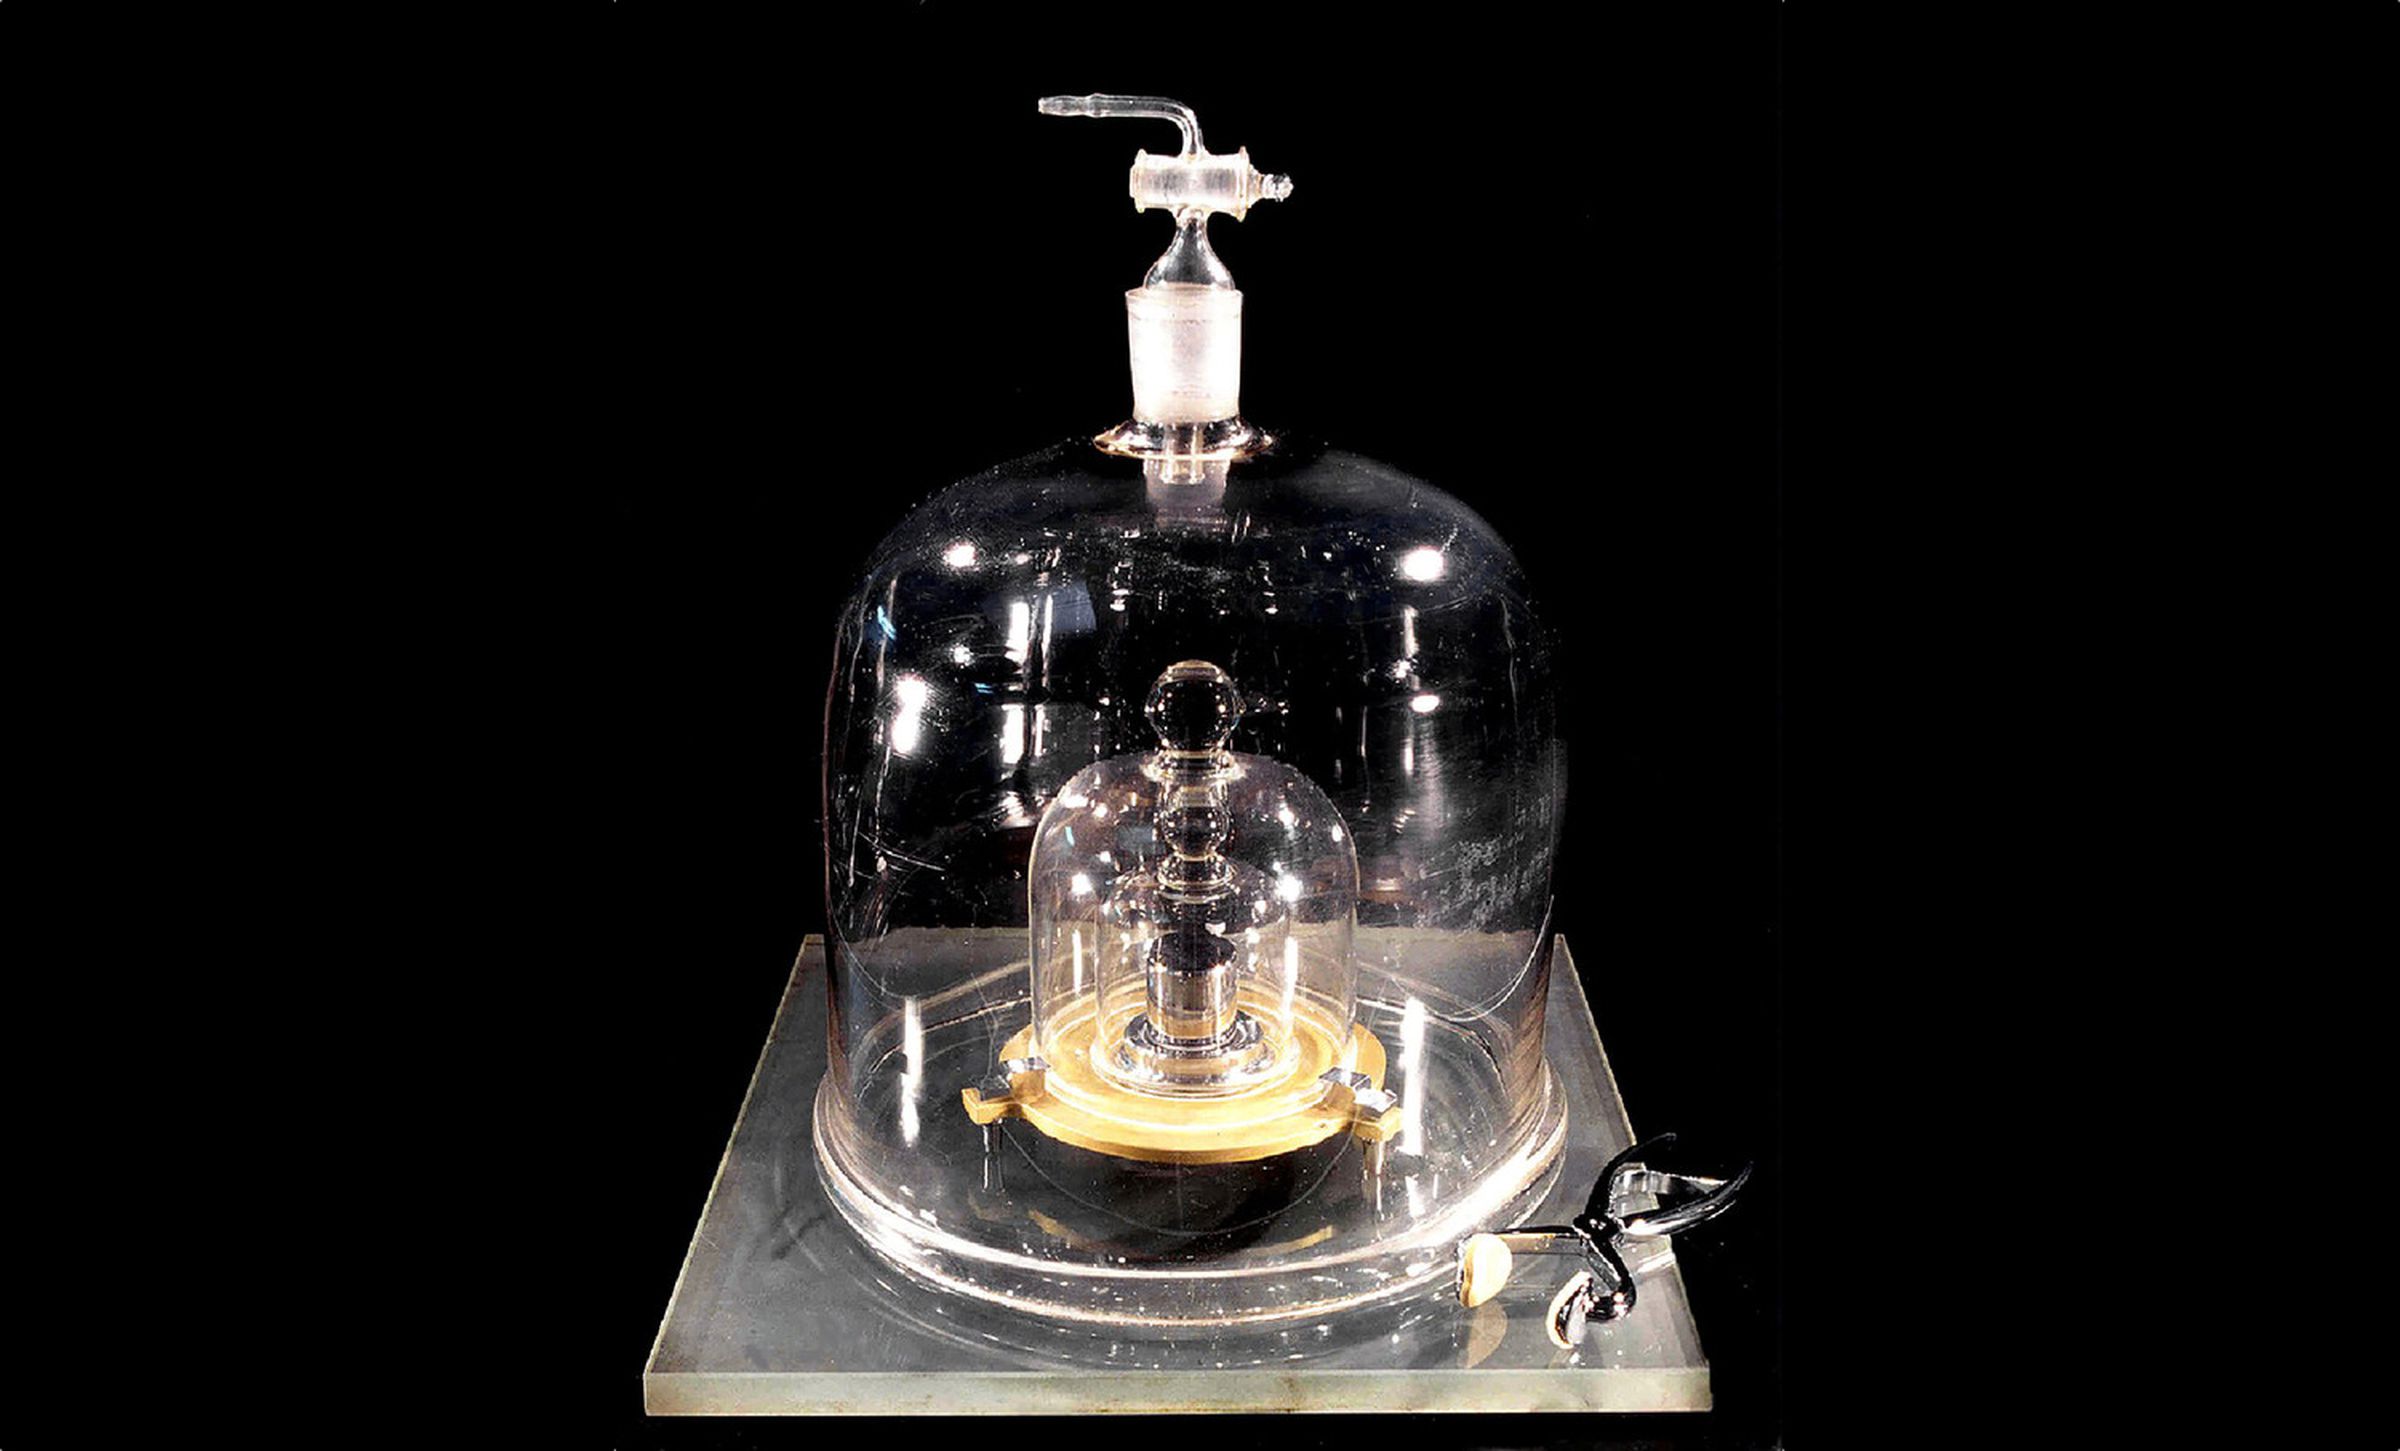 The original International Prototype Kilogram was cast in 1889 and is kept in a trio of vacuum-sealed bell jars in a vault near Paris. 